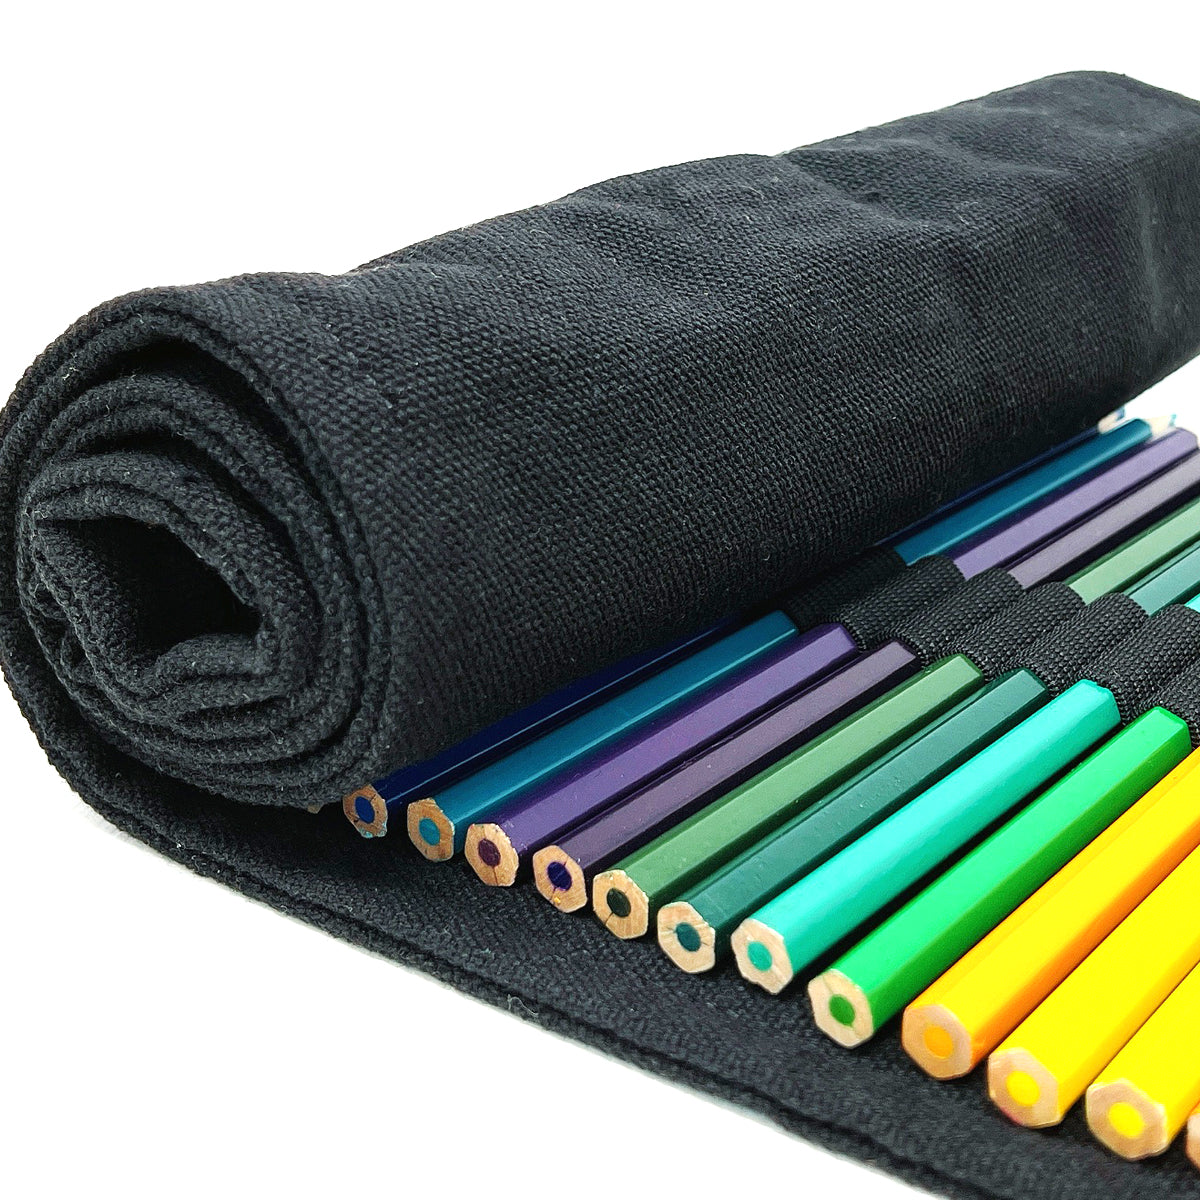 Gray Pencil Roll Wrap, Canvas Stationery Roll Up Pencil Case 72